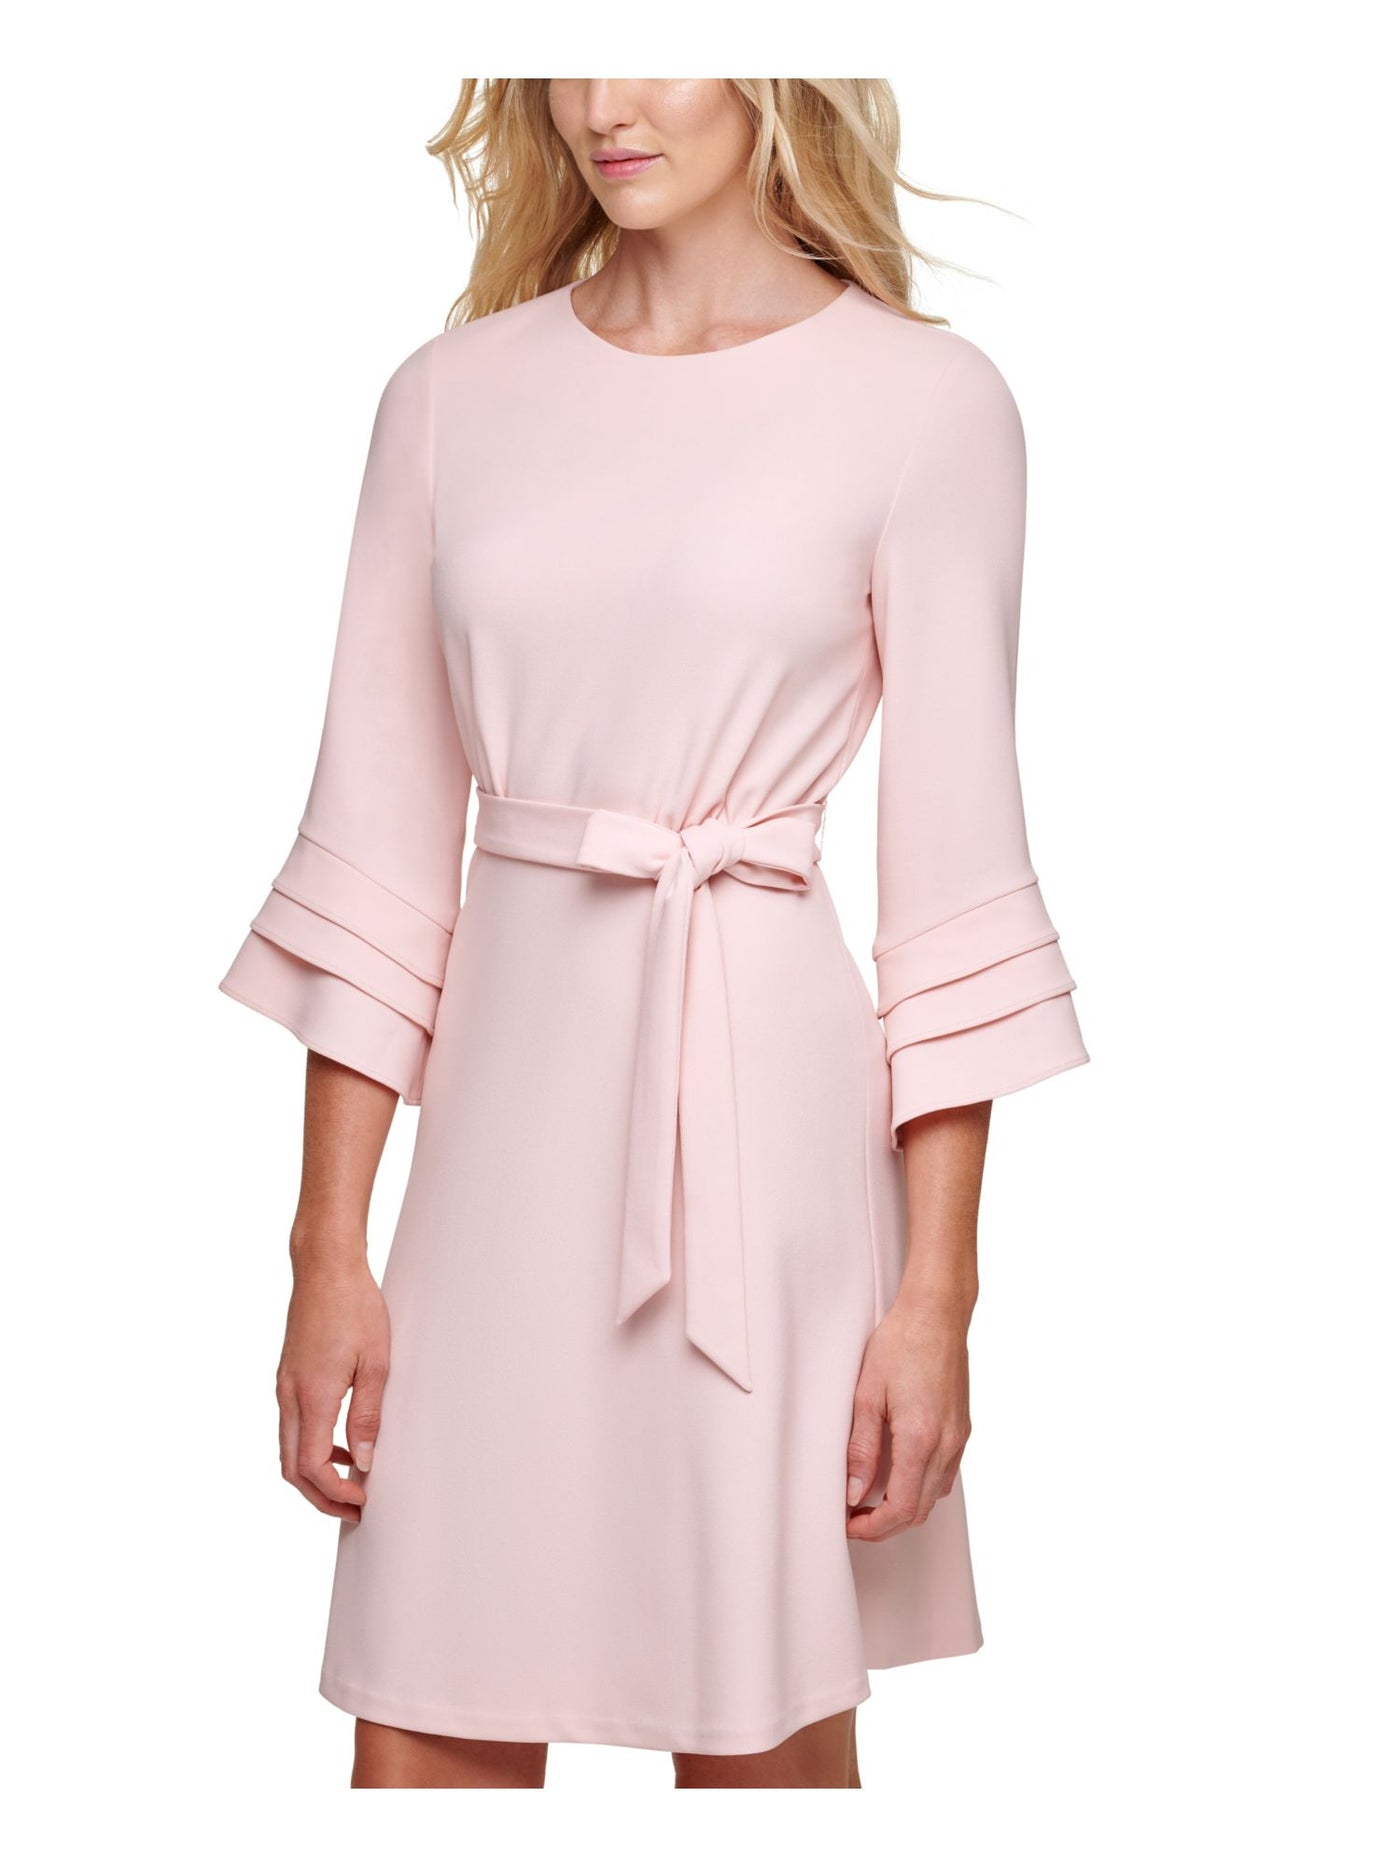 DKNY Womens Belted Zippered Textured Bell Sleeve Jewel Neck Above The Knee Wear To Work A-Line Dress